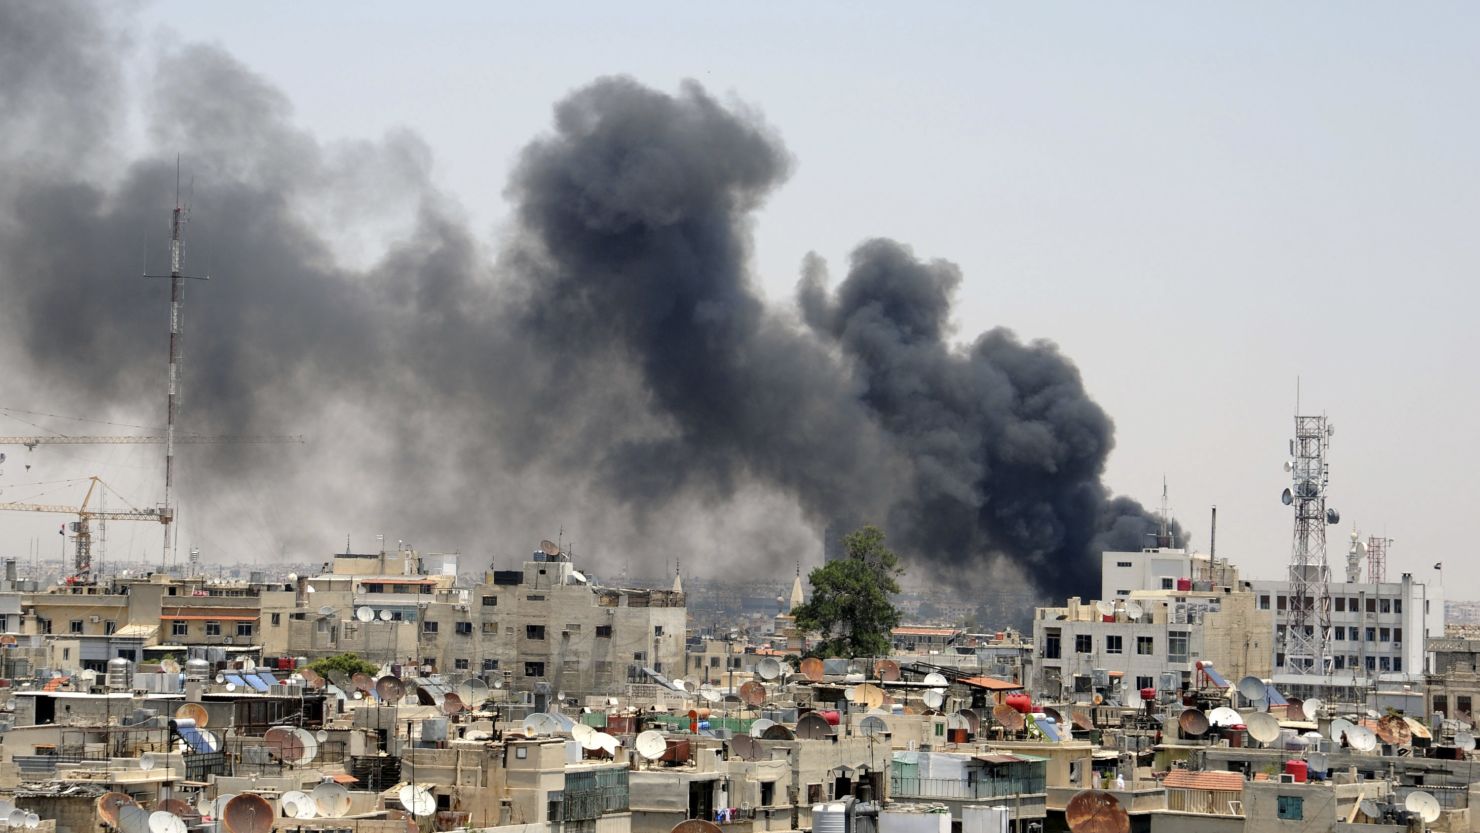 Smoke rises after an explosion Thursday near the Palace of Justice in central Damascus, Syria.